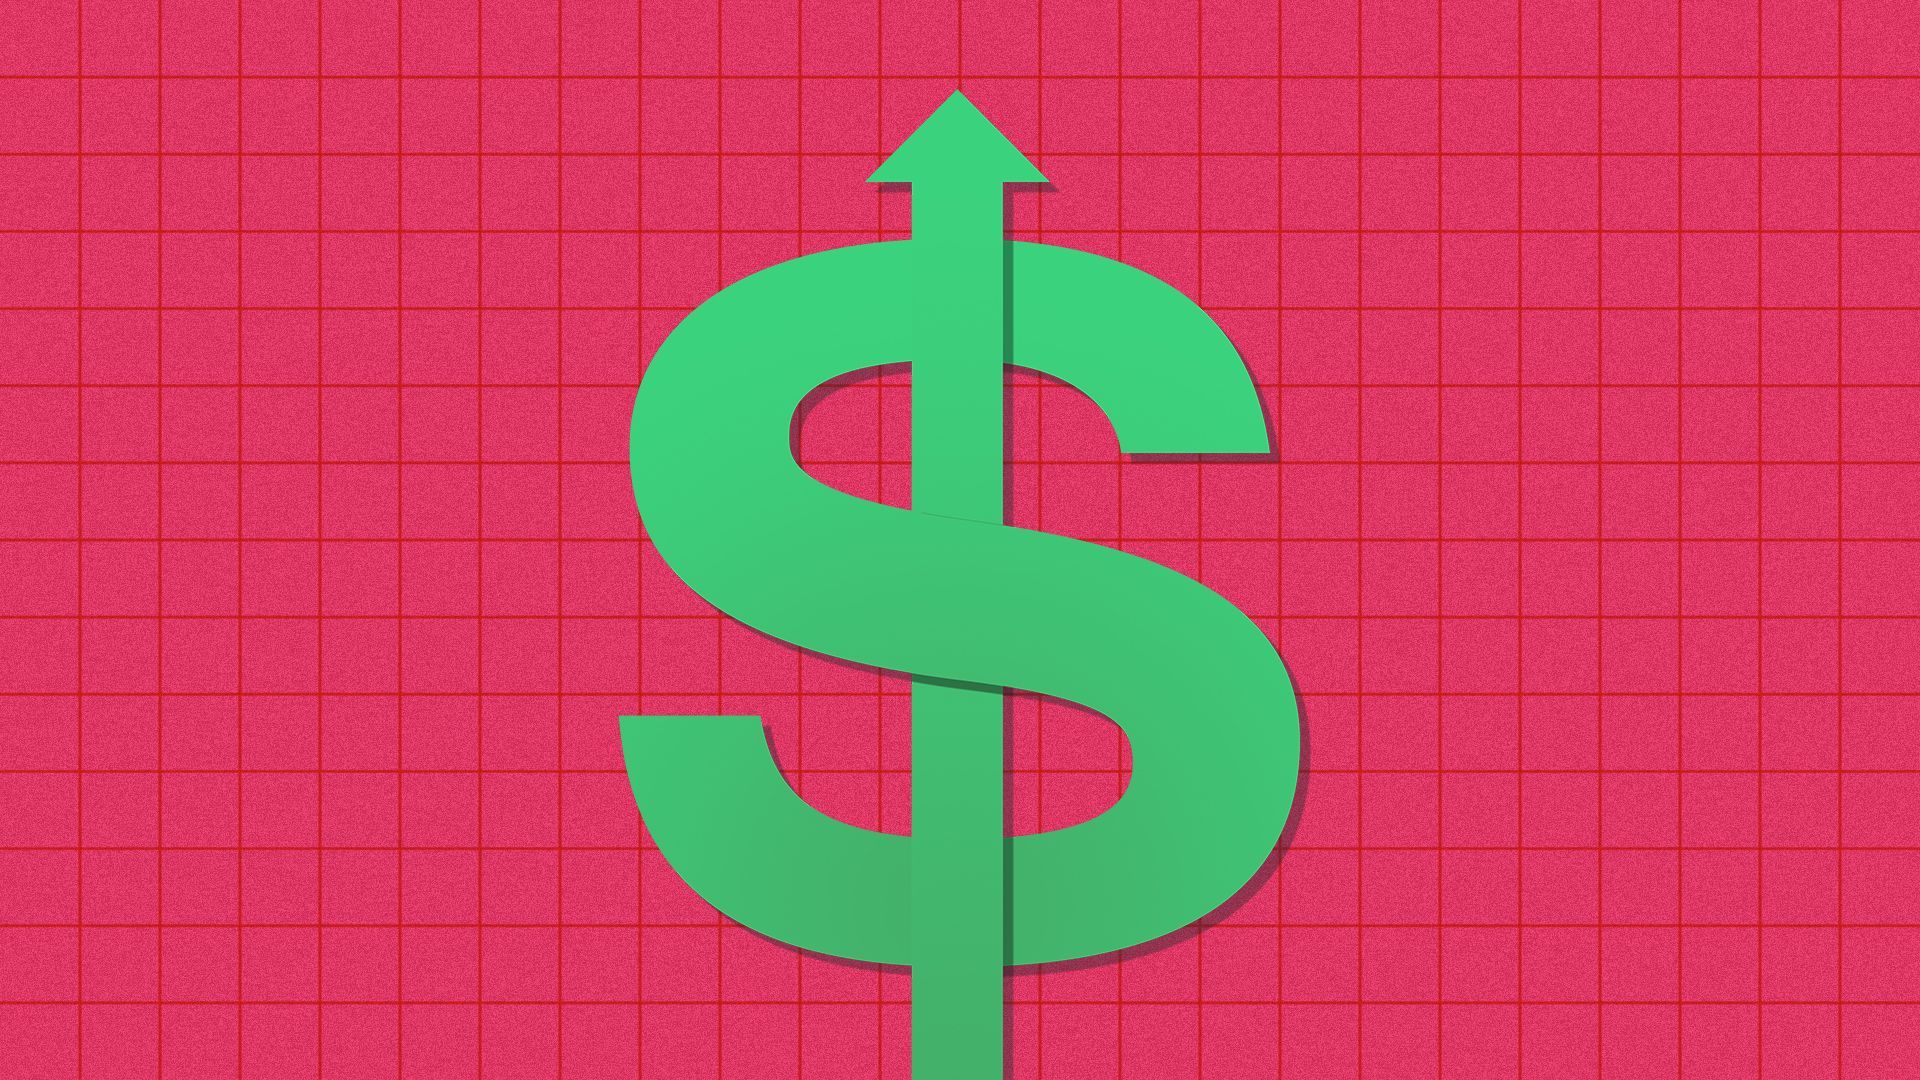 Illustration of a dollar sign with an arrow for a middle bar over a grid.